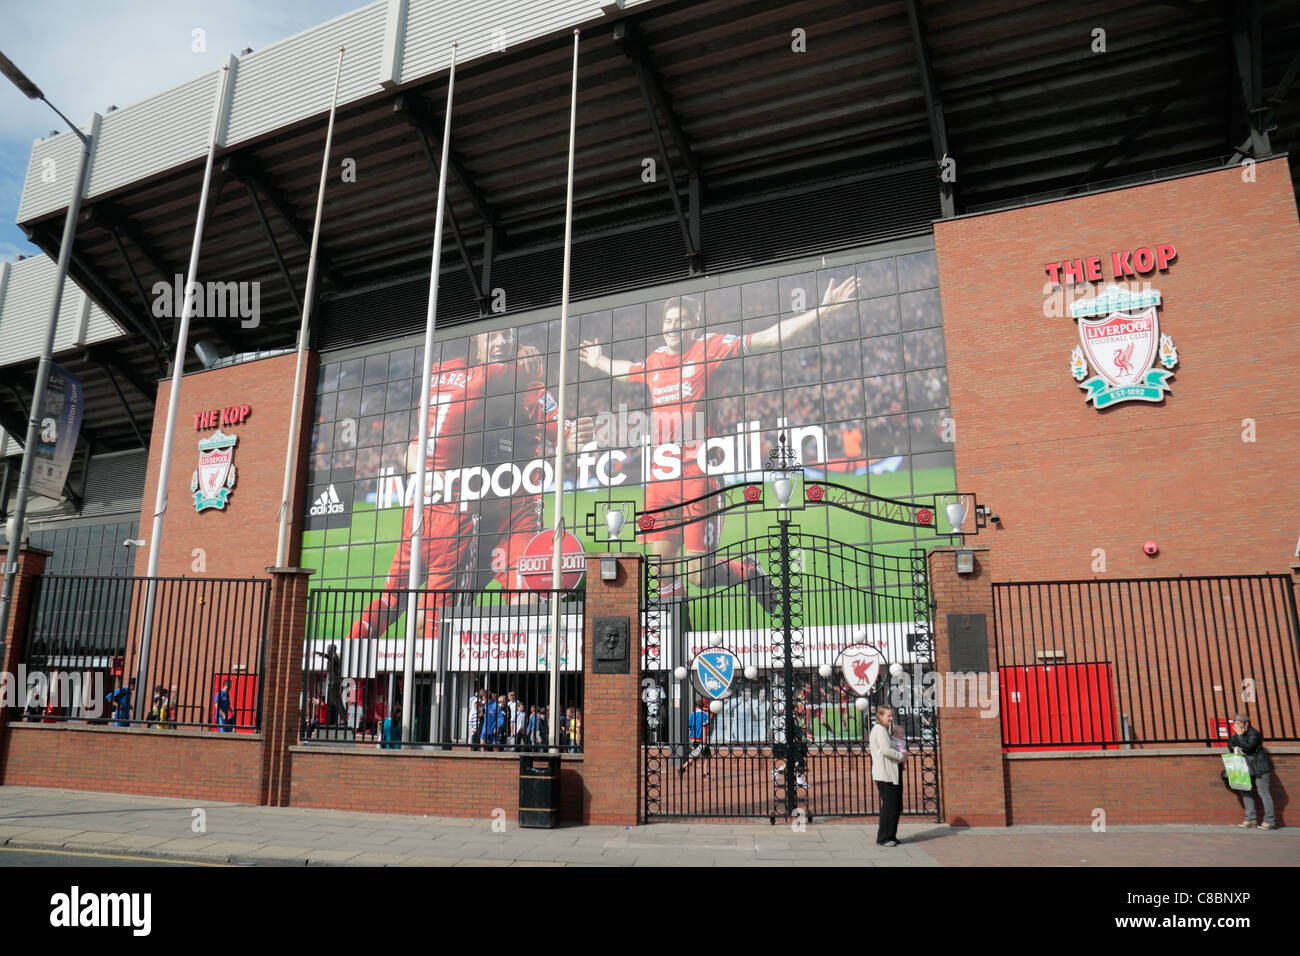 External view of the Kop end of Anfield, with the Paisley Gate at the home ground of Liverpool Football club.  Aug 2011 Stock Photo